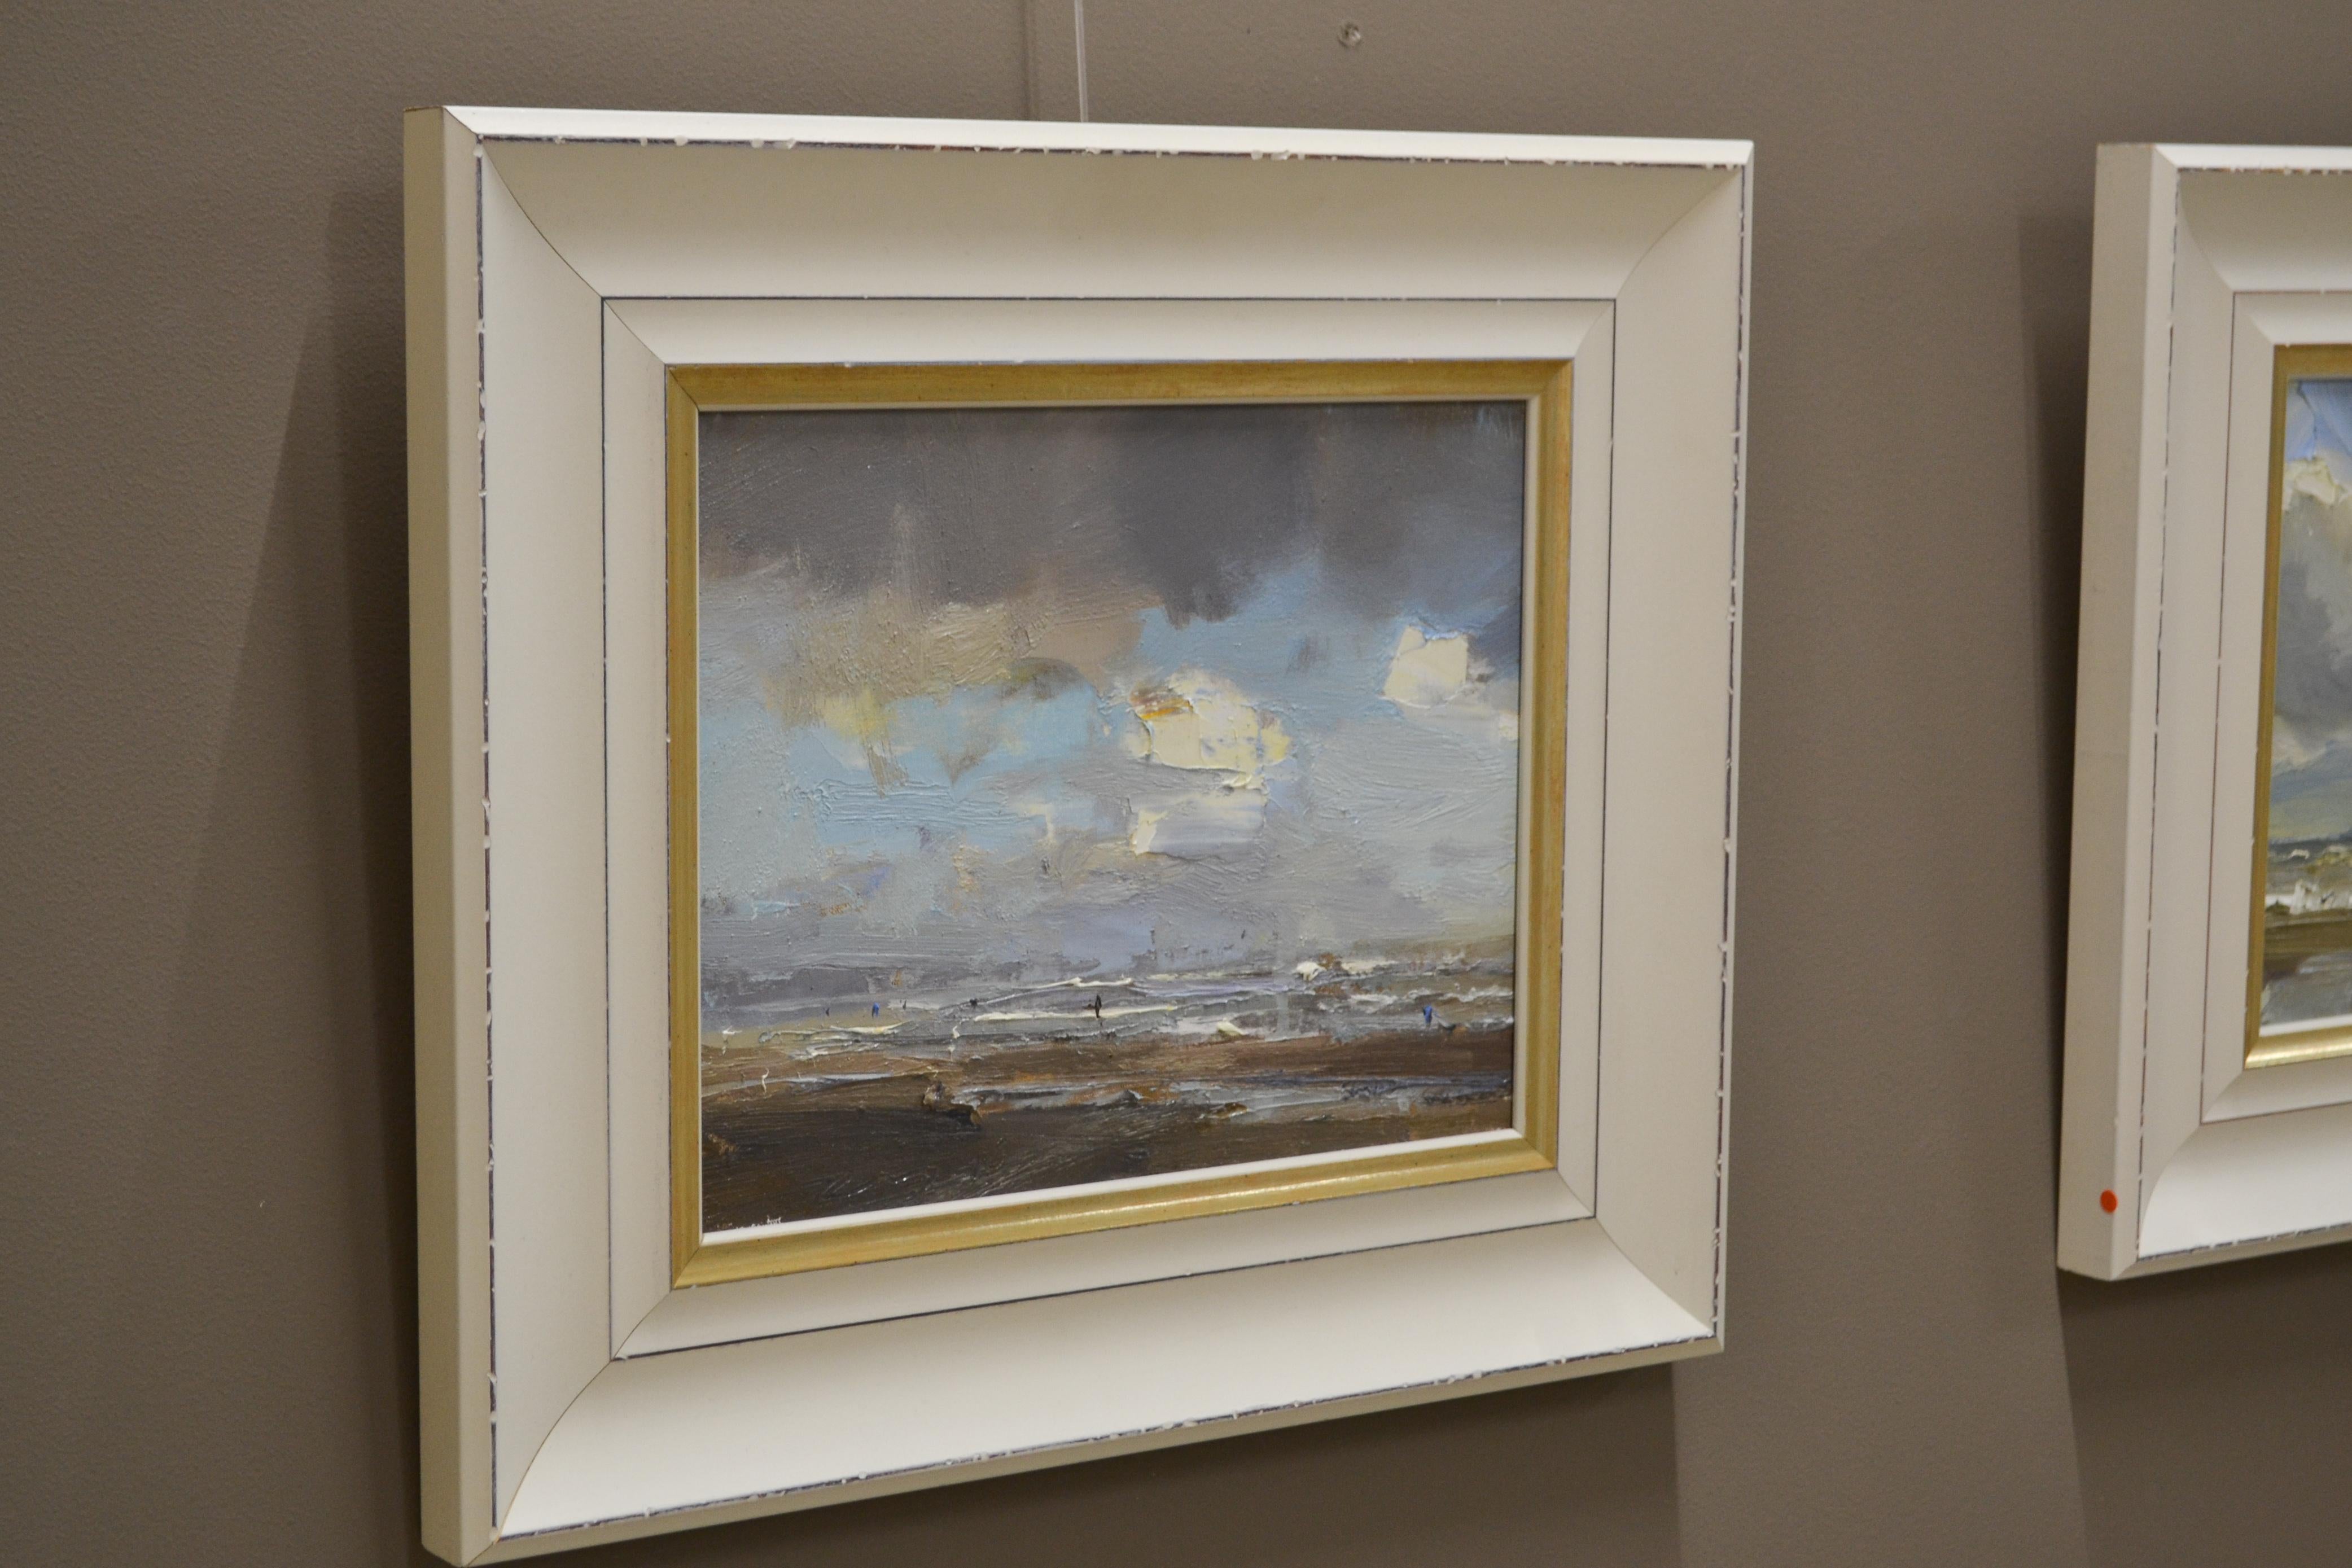 Seascape Fascinating Creamy White Clouds, Roos Schuring, 21st Century  2